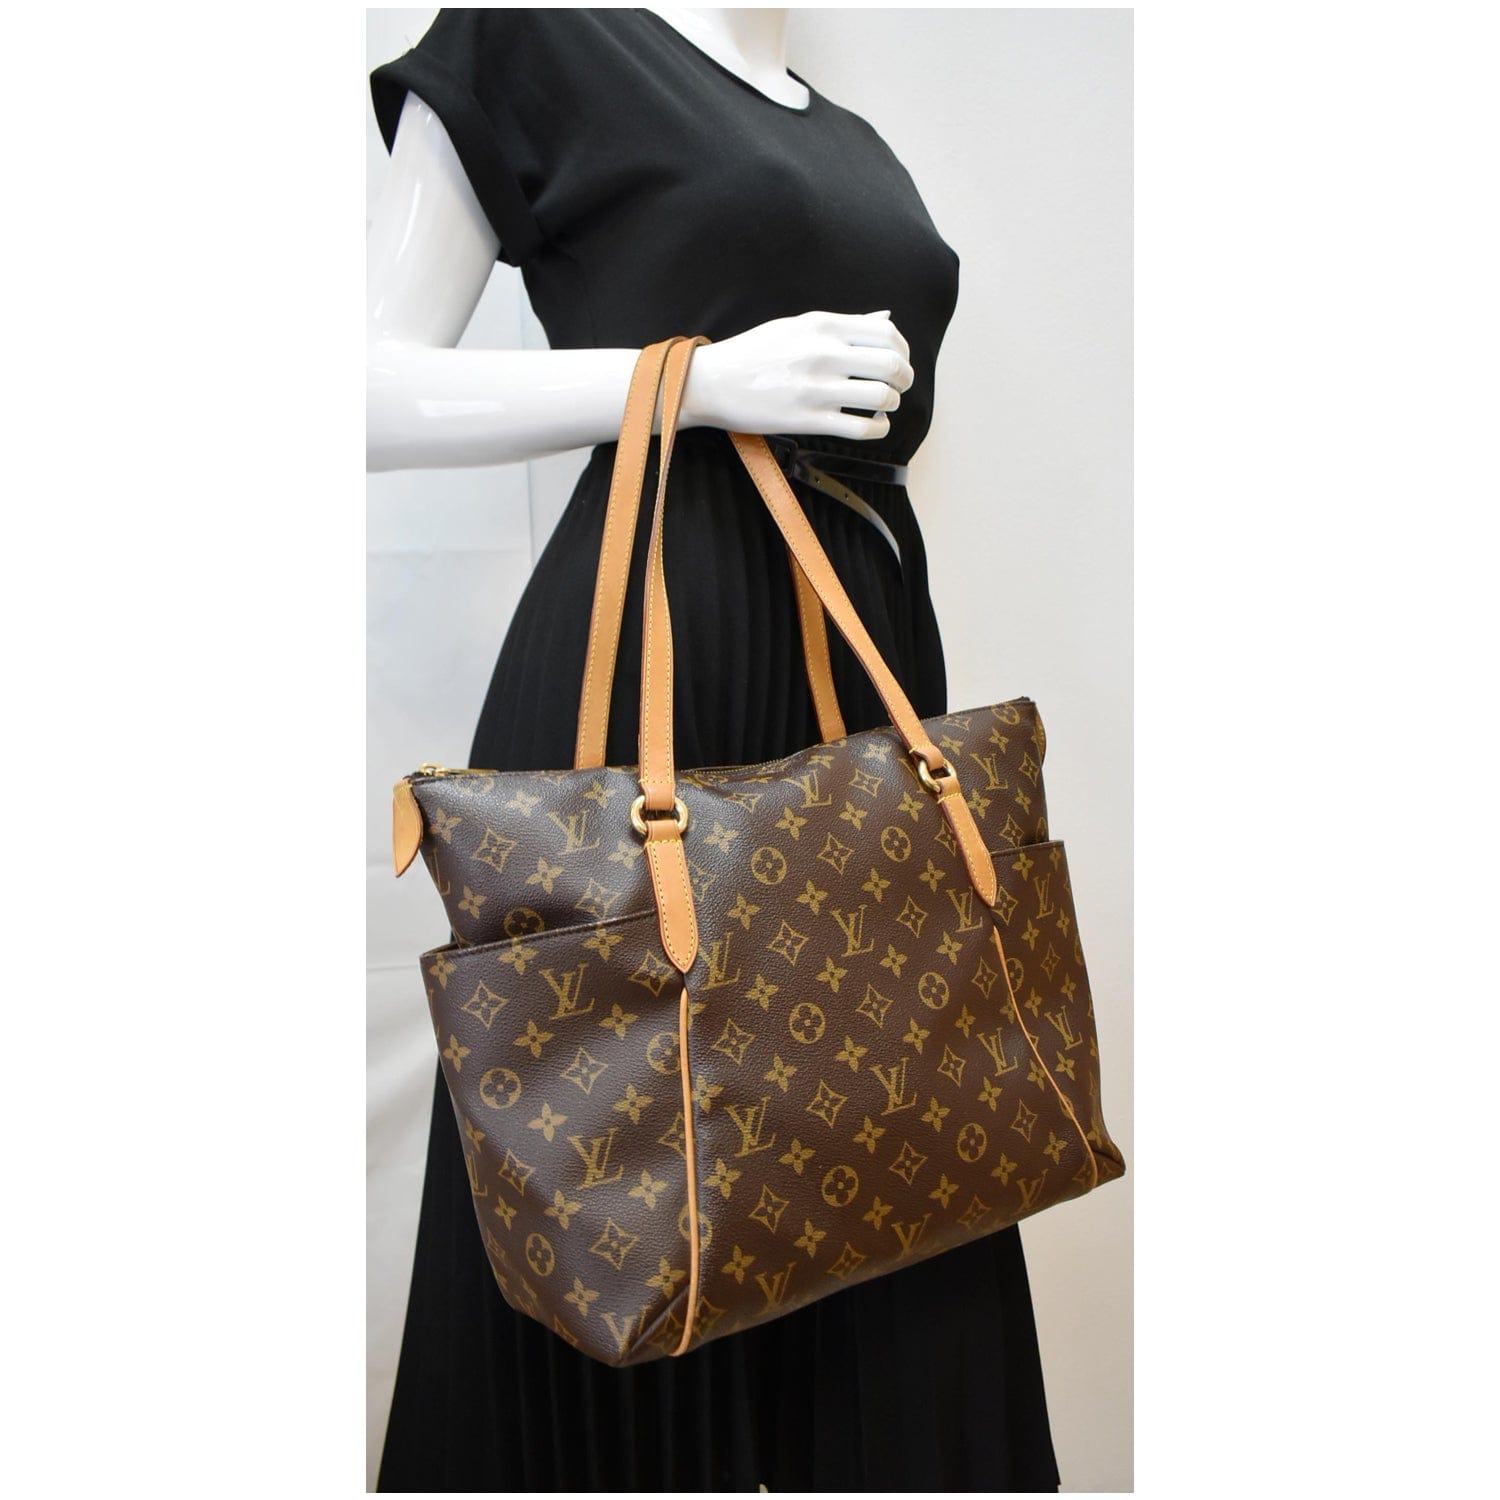 Authentic Louis Vuitton Monogram Totally MM Tote Bag M56689Used FS  eBay